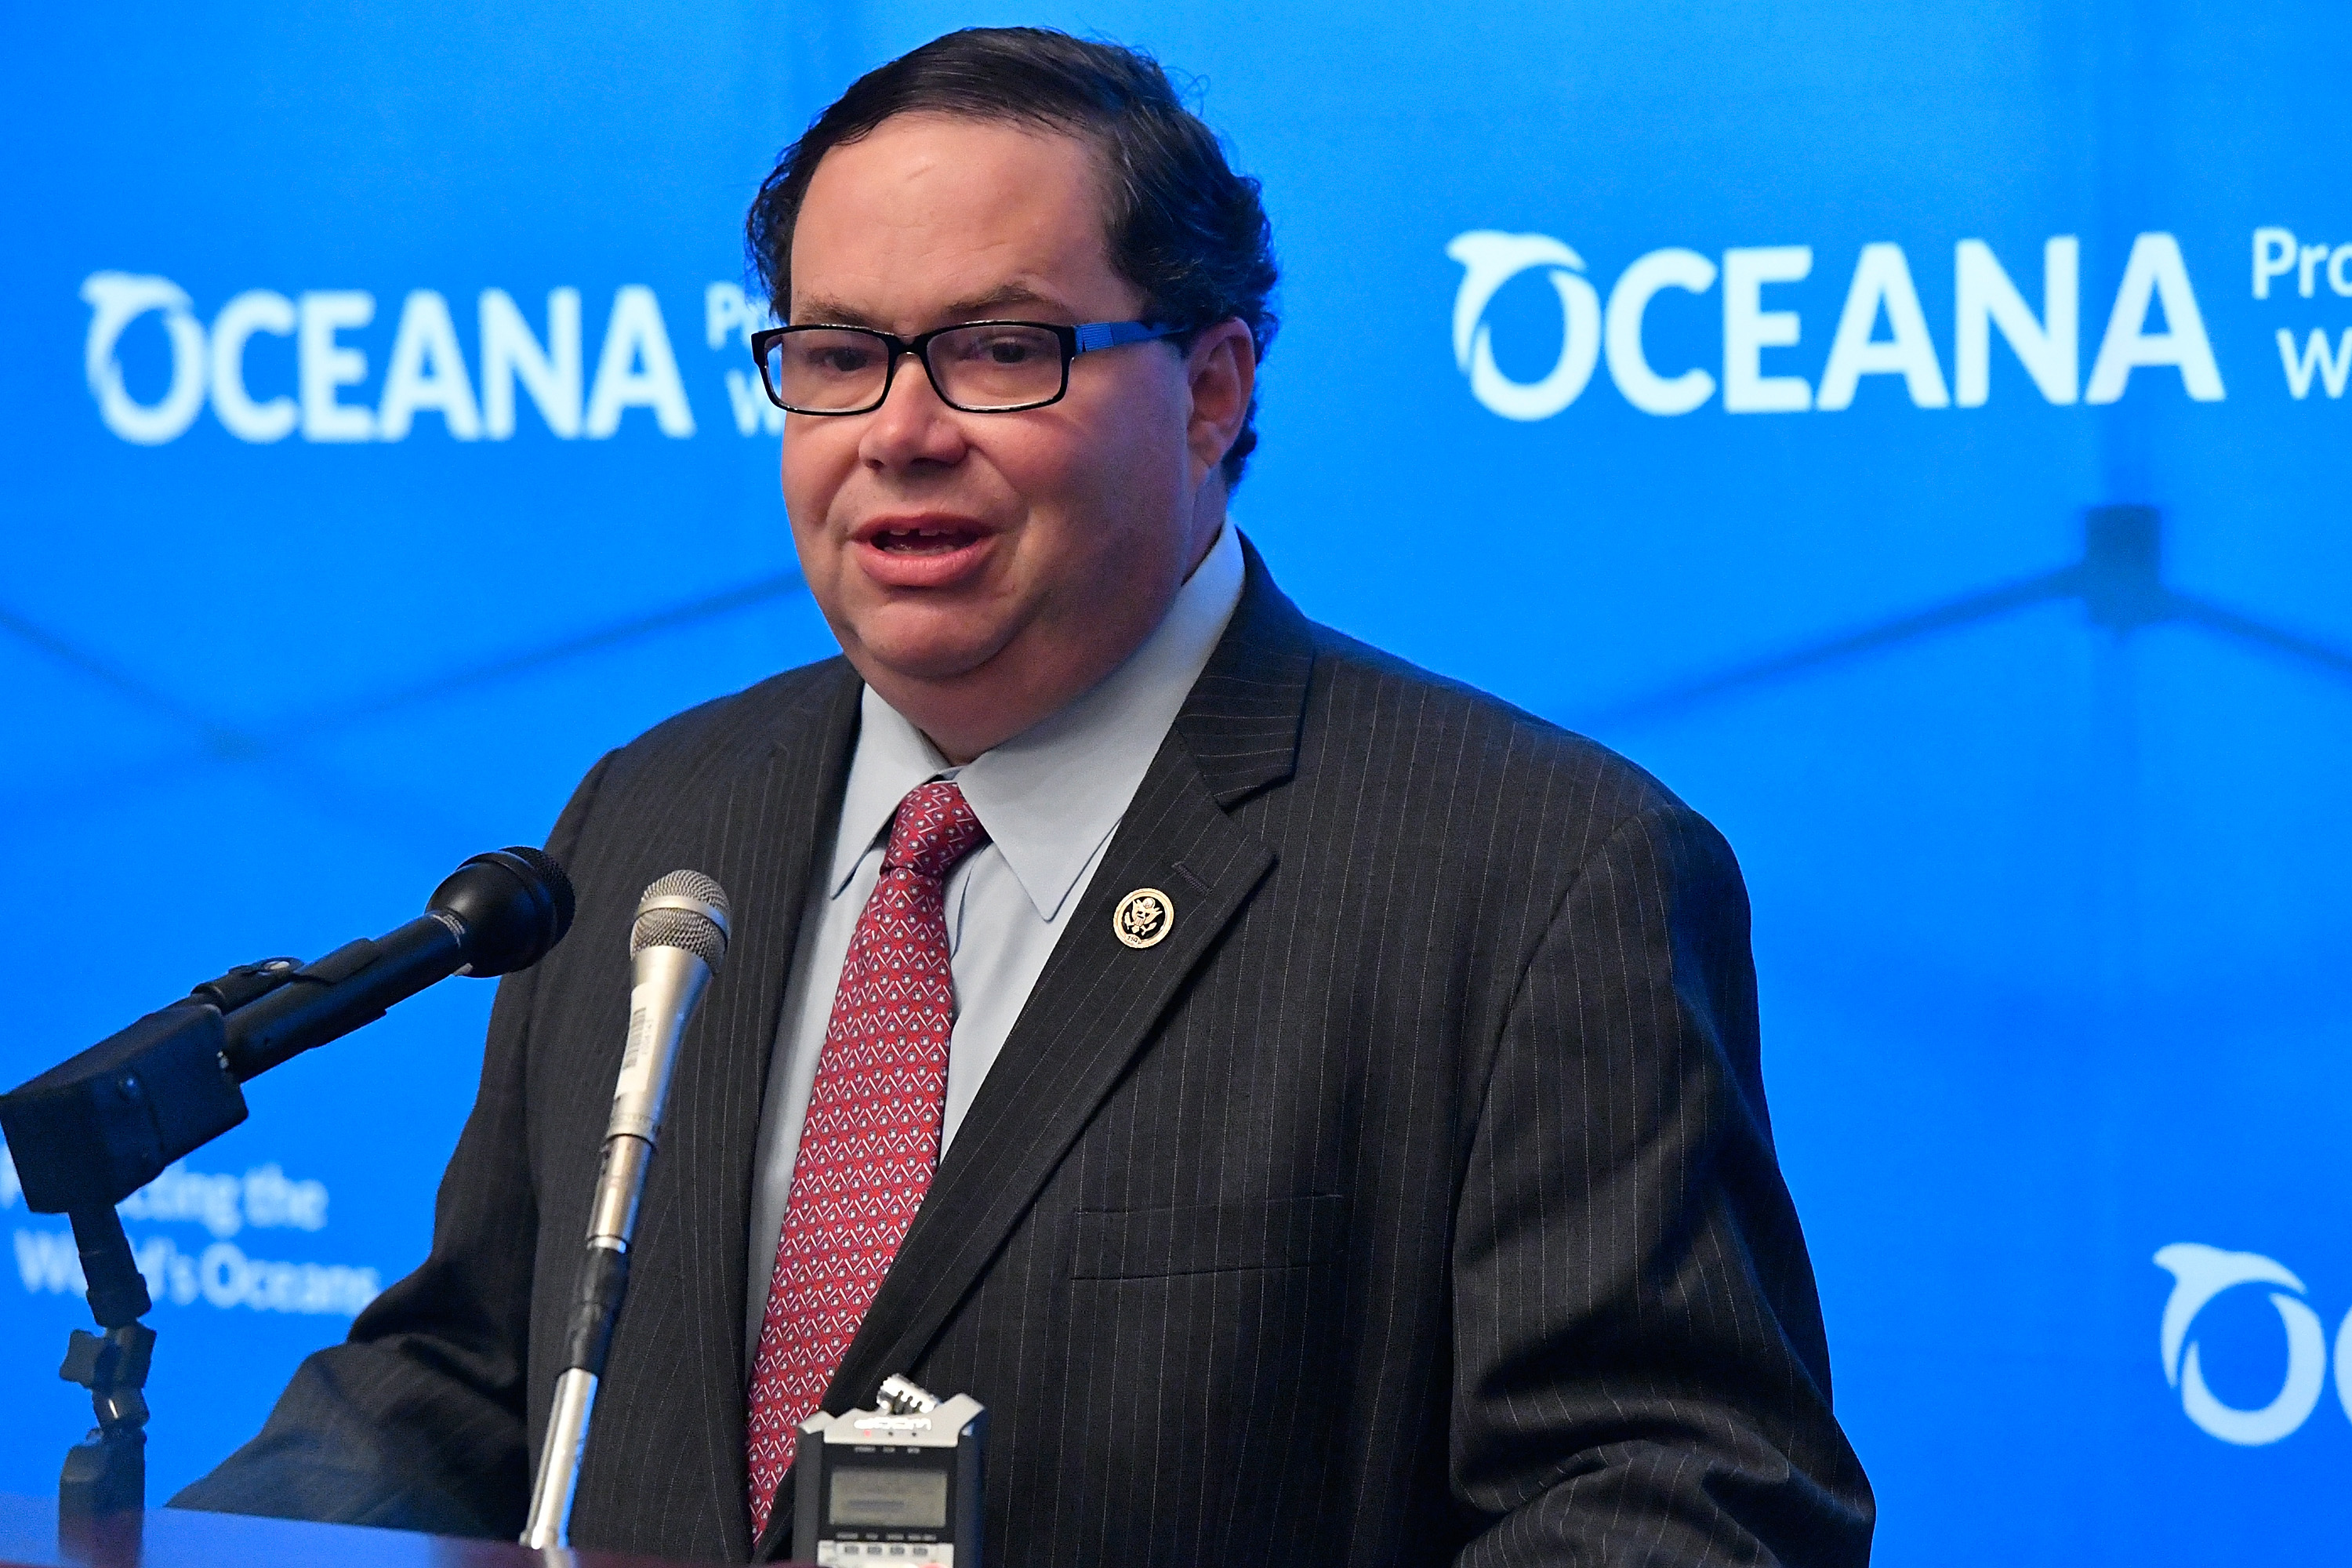 Representative Blake Farenthold (R-TX) speaks at an event on June 23, 2016 in Washington, DC. (Larry French—Getty Images)